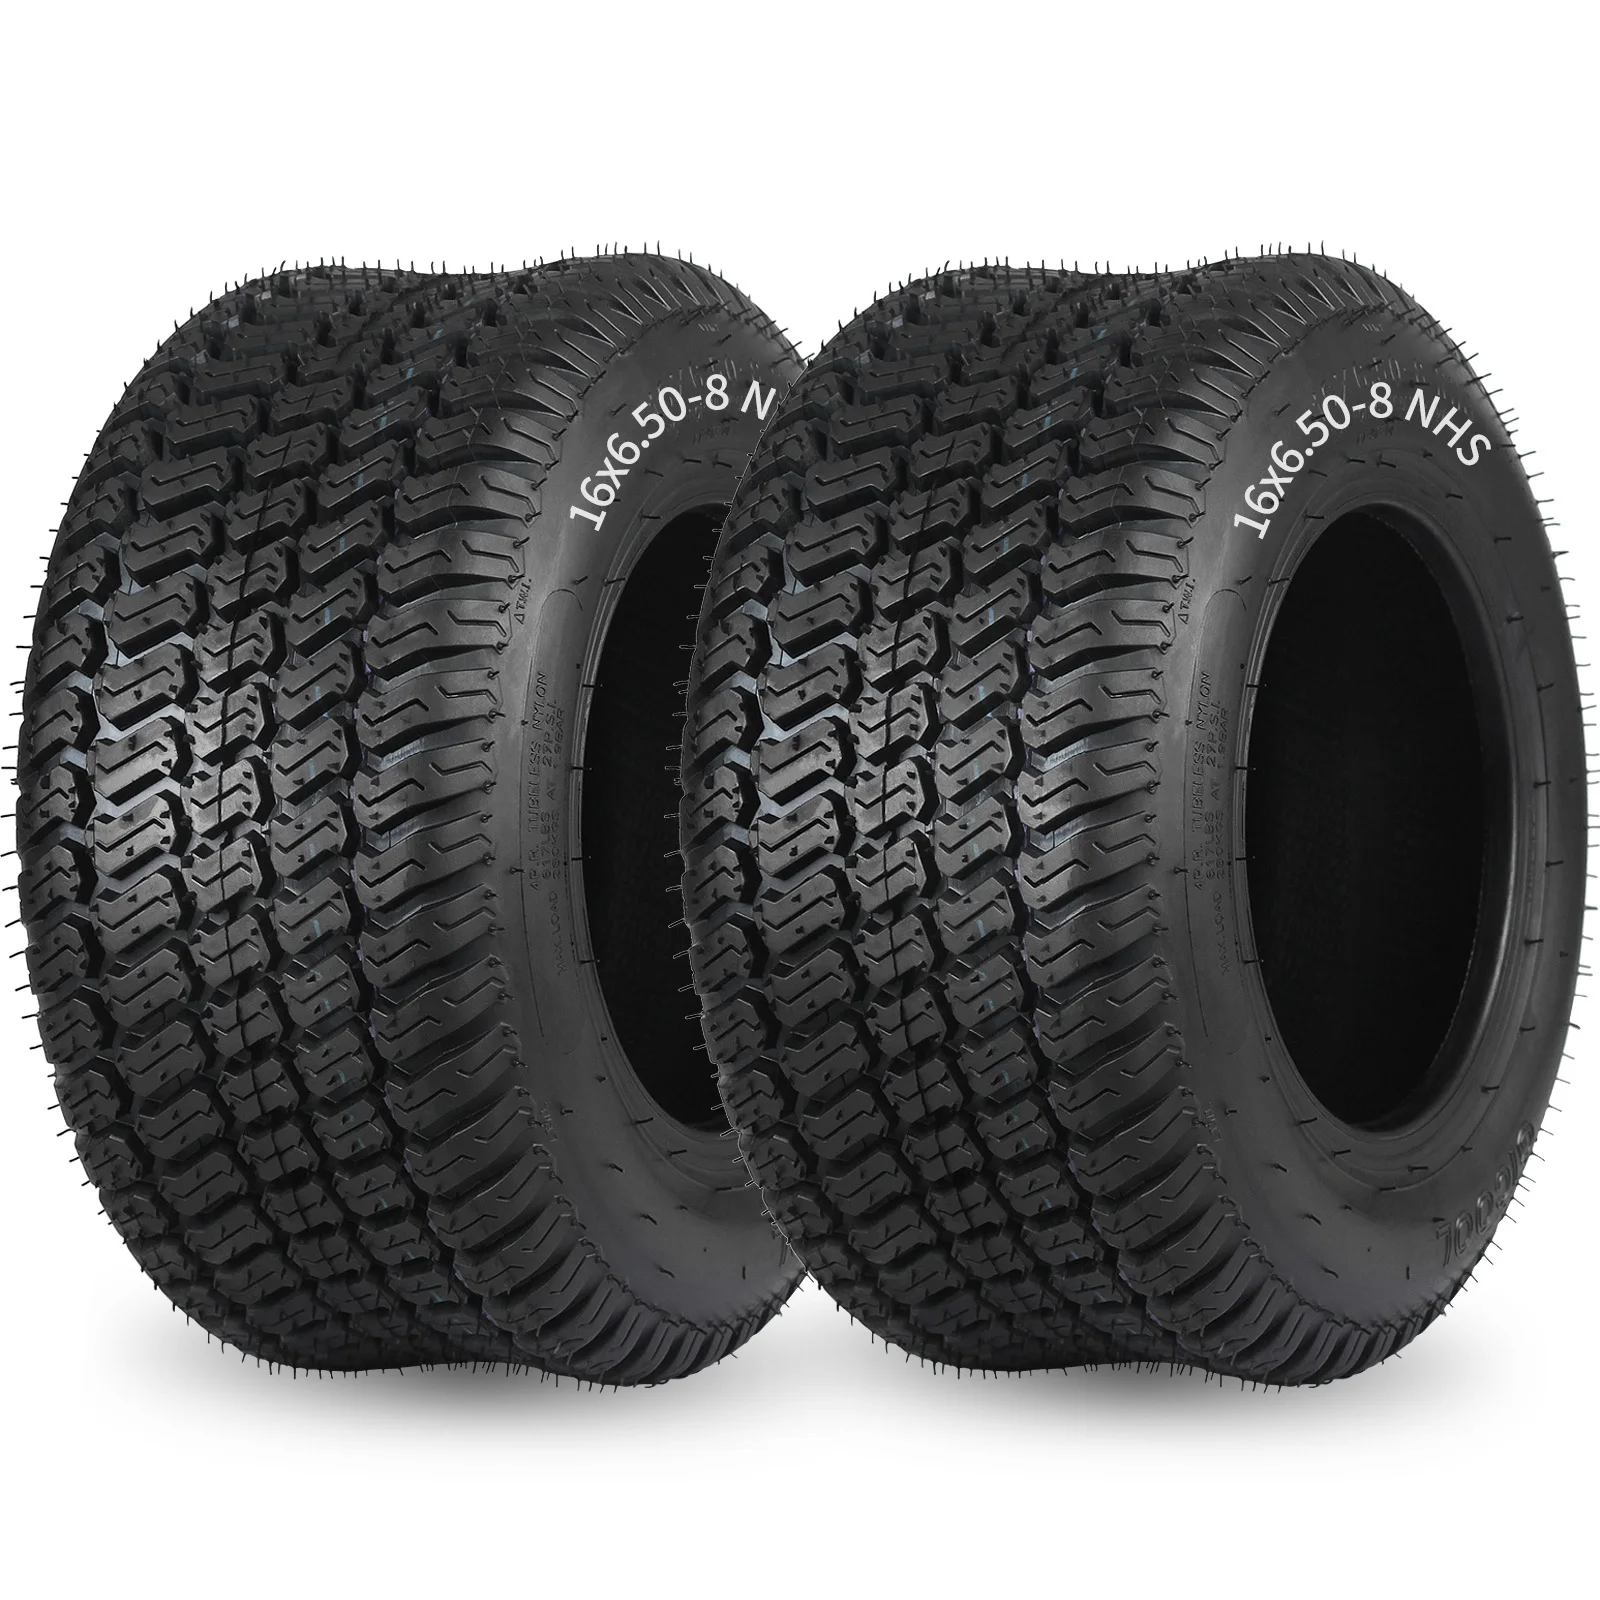 16 x 6.50-8 Turf-S Pattern Lawn Mower Tubeless Tire, 16x6.5-8 for Tractor Riding Lawnmowers